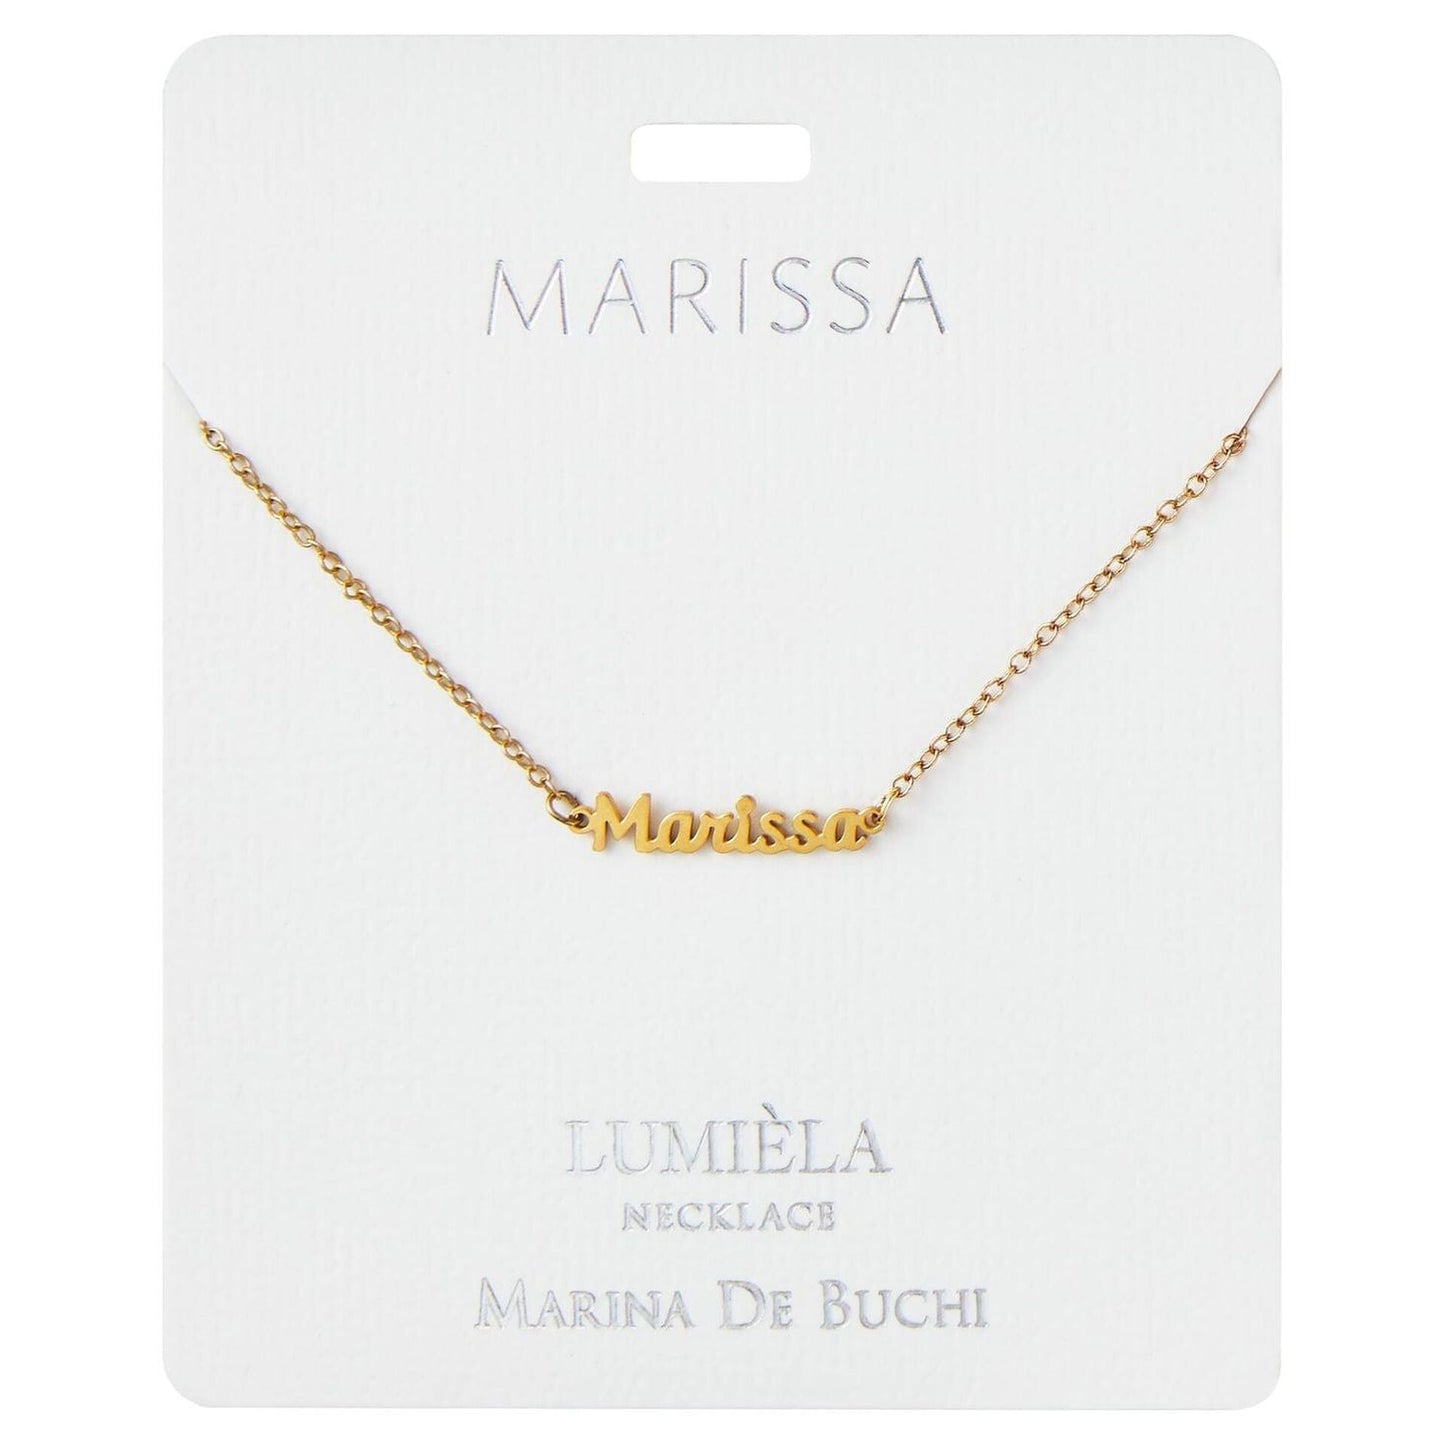 Lumiela Personalized Nameplate Brooklyn Necklace in Gold Tone